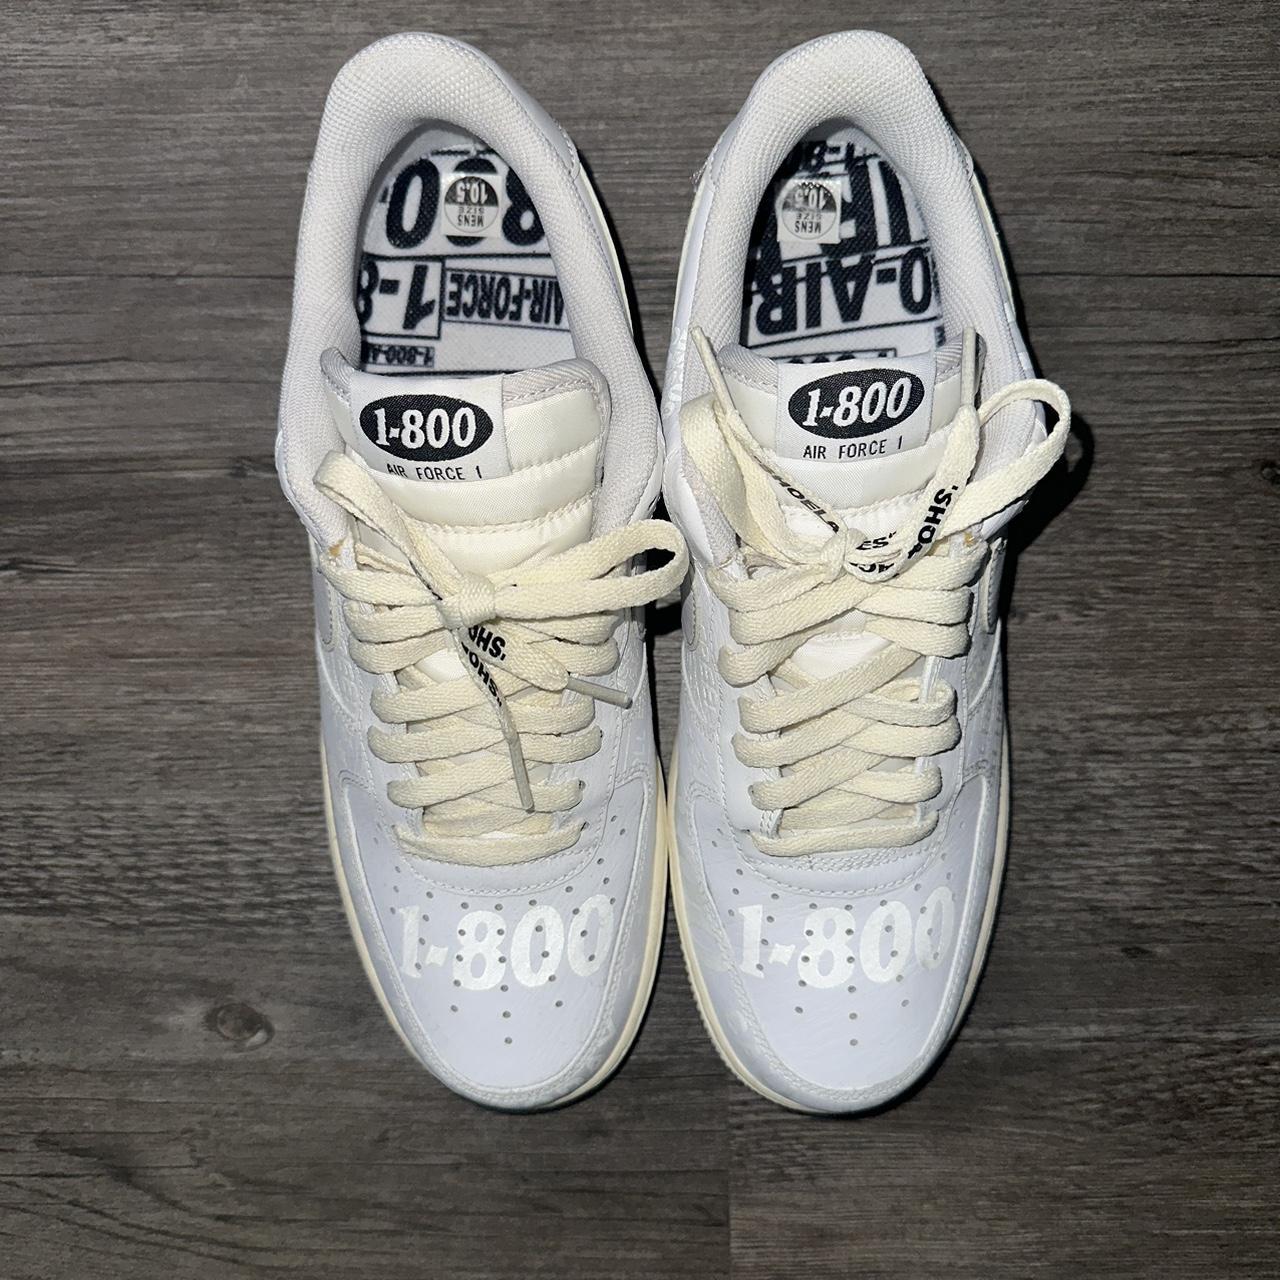 Nike Air Force 1 1-800, Lace Swap with sail laces- I...